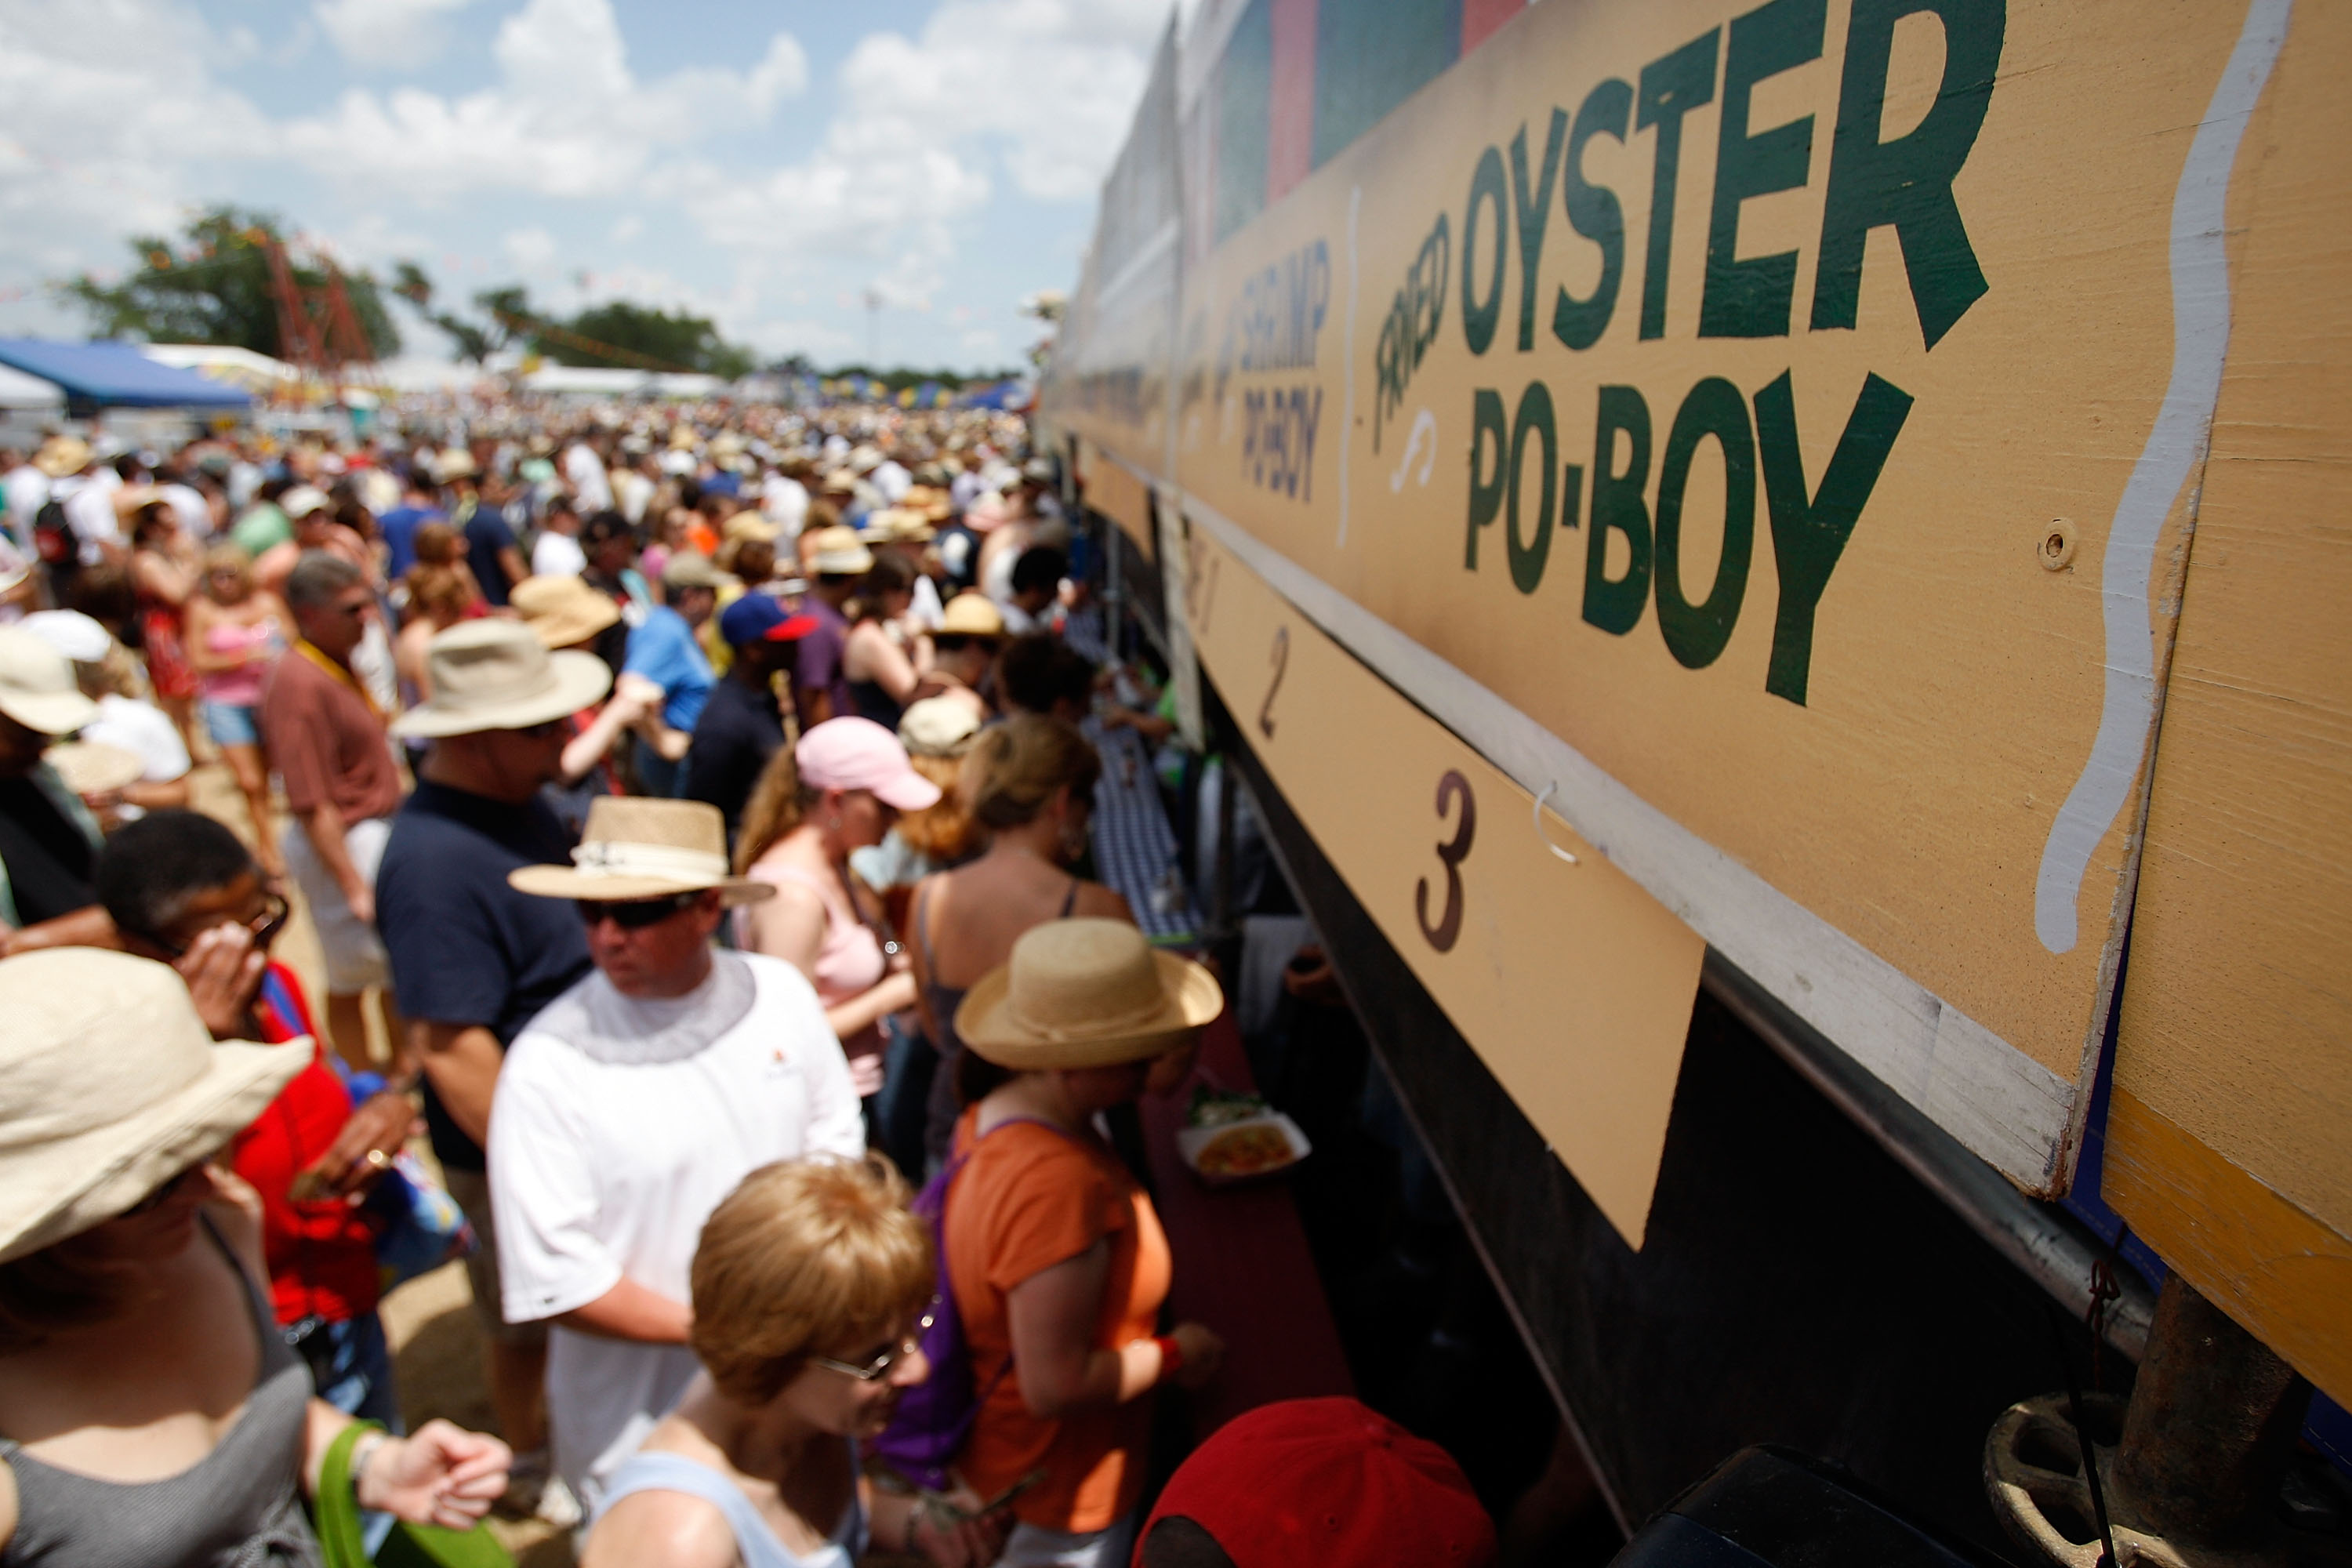 Crowds of people lining up to purchase food at Jazz Fest in New orleans, with a close-up view of the signage above the food stands visible in the foreground to the right. 